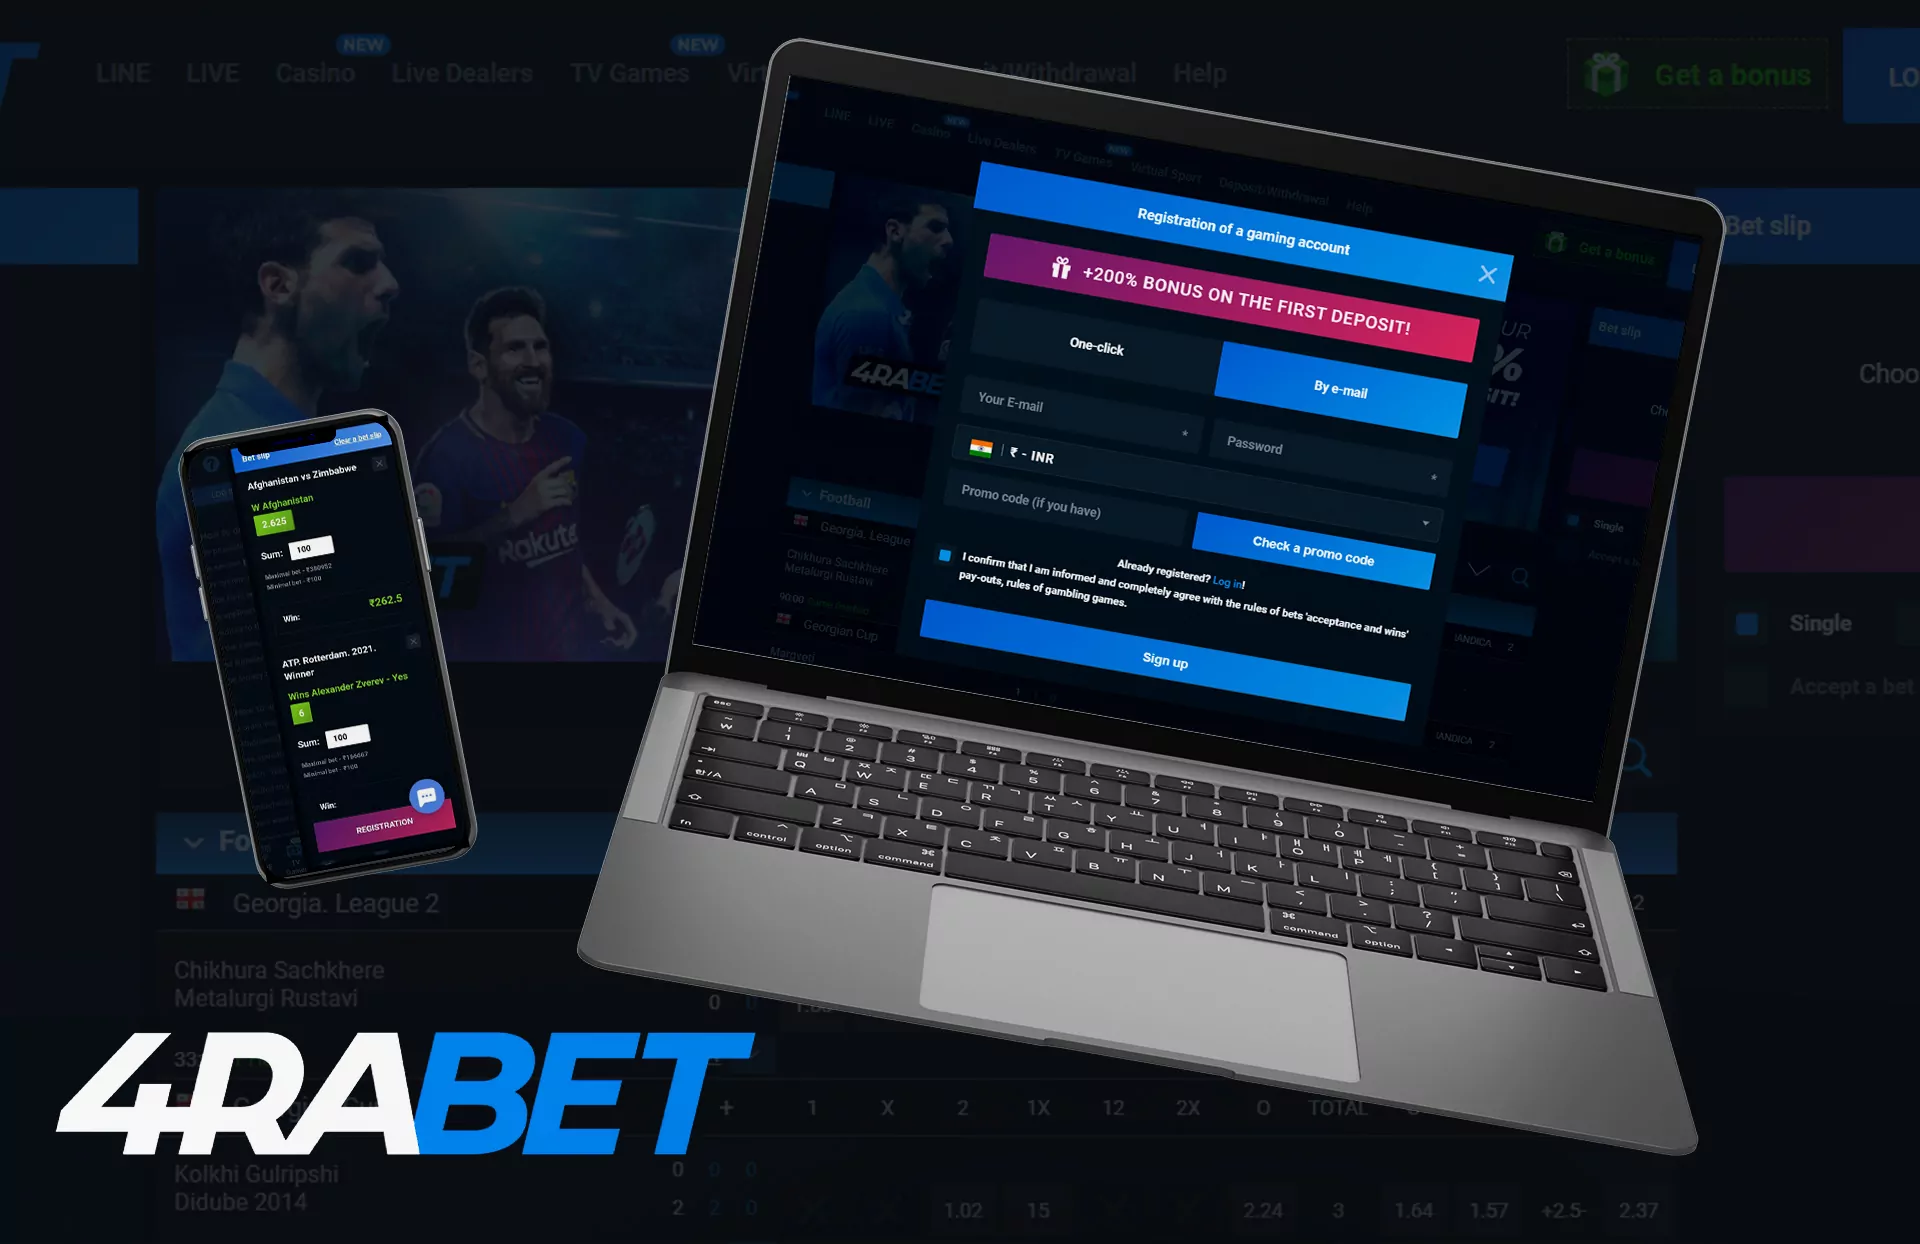 You can easily place bets on both mobile phone or your laptop.